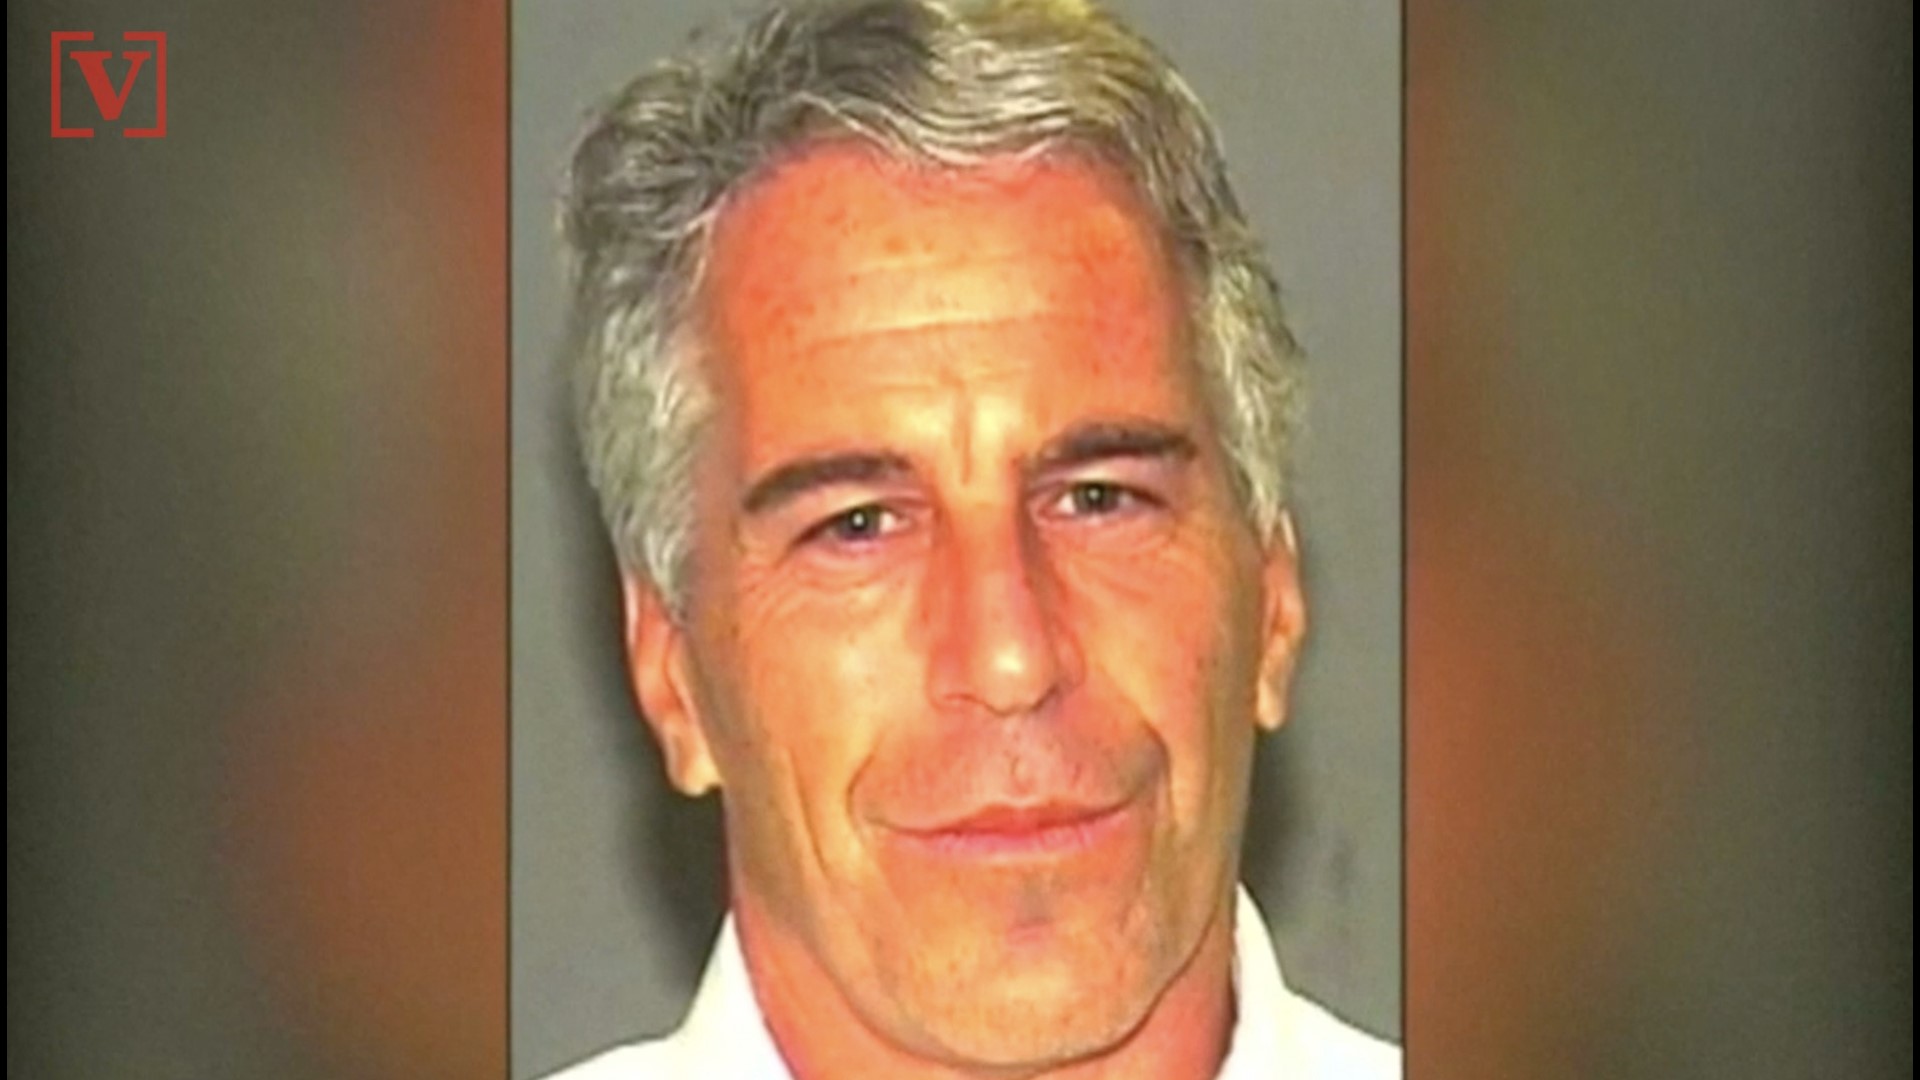 Lawyers for Jeffrey Epstein asked a judge to investigate the cause of their client's death, saying they have evidence to suggest he was killed while in jail. Veuer's Justin Kircher has more.